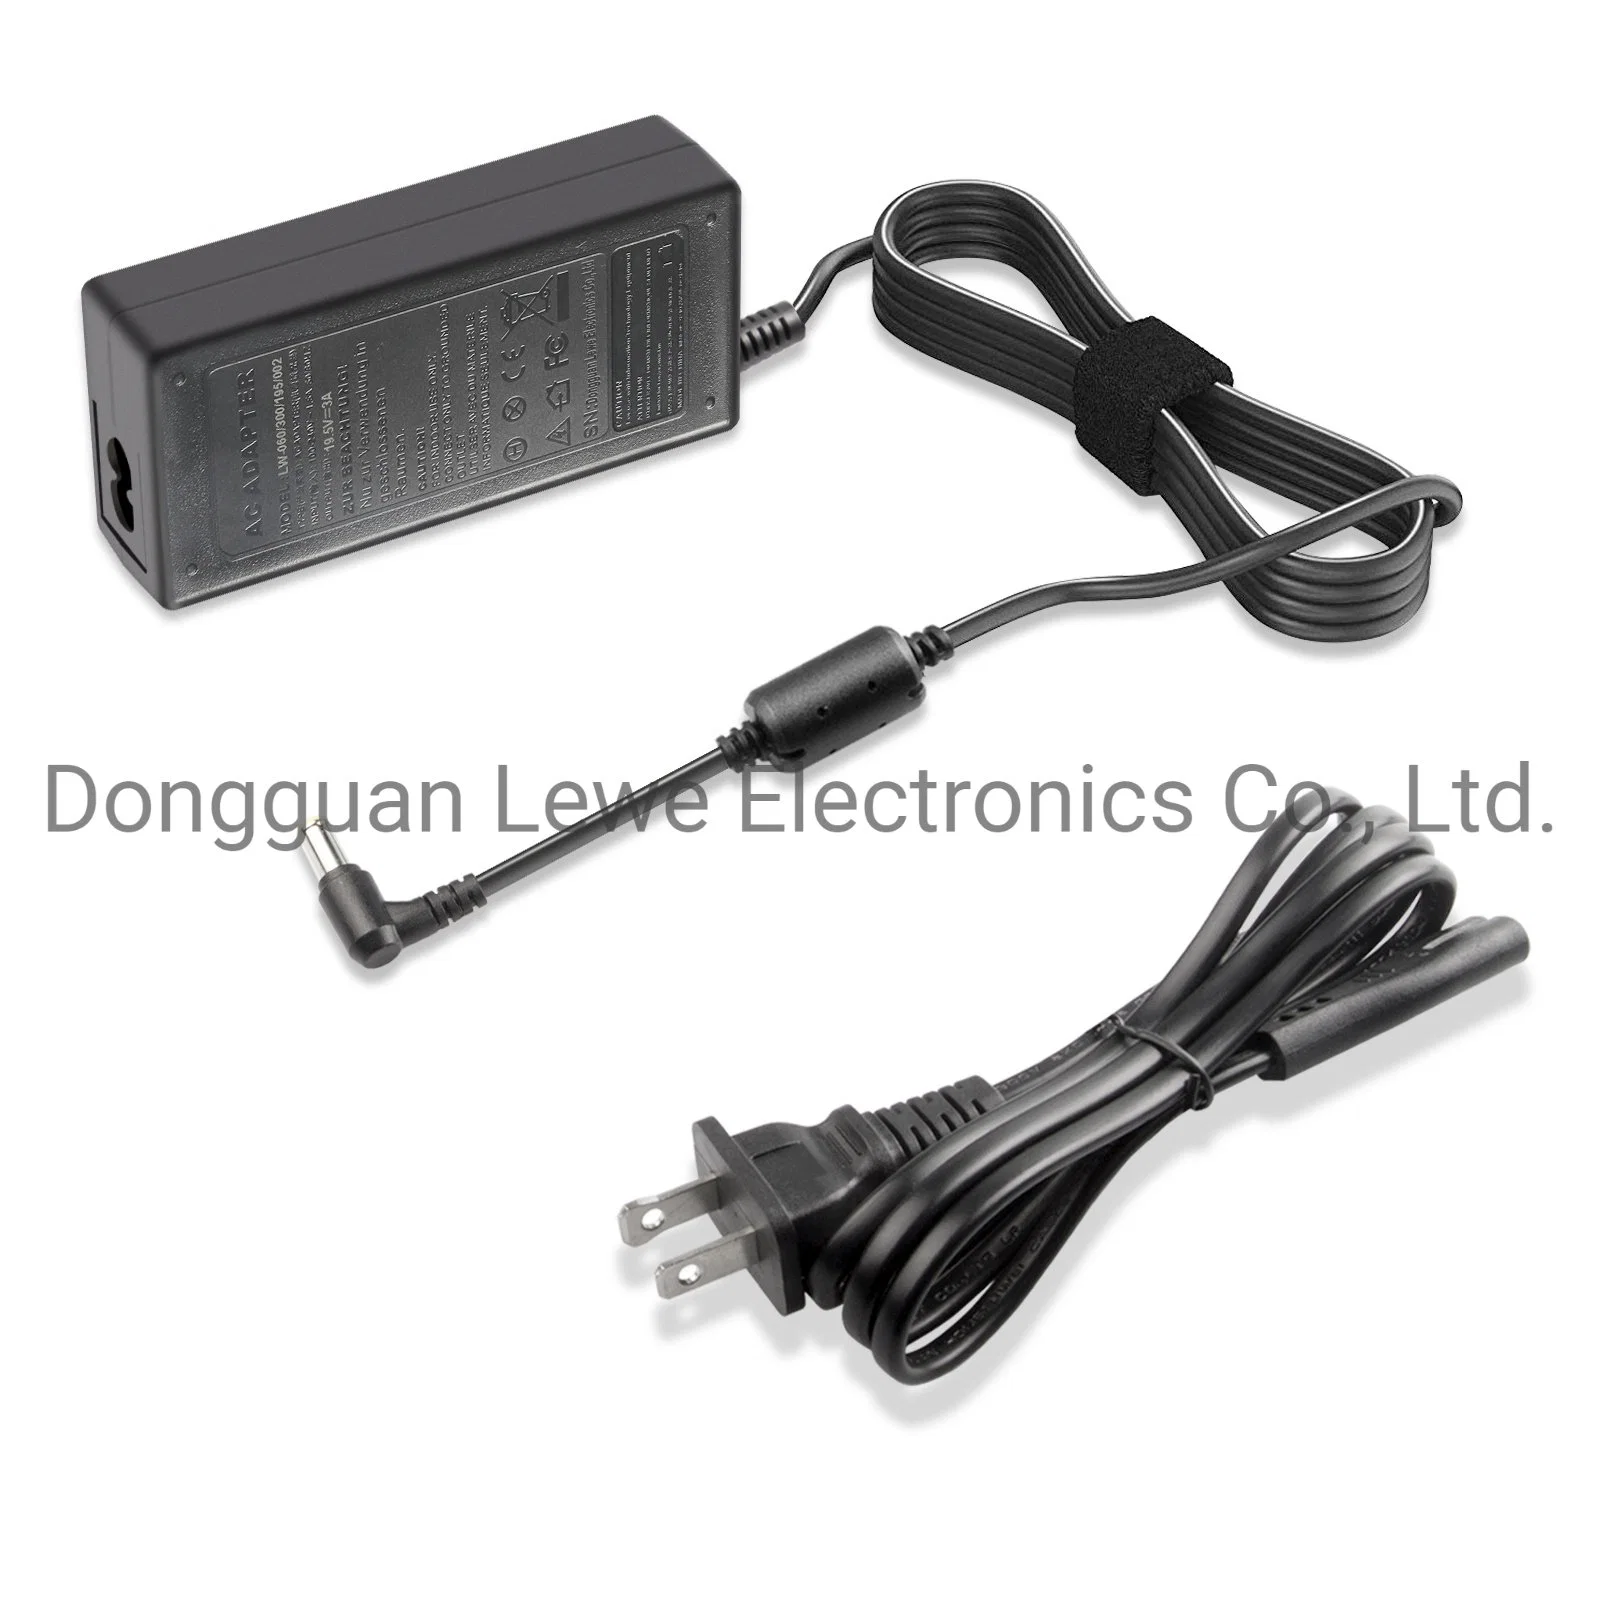 20V 2.25A 45W AC Power Adapter Charger for Lenovo Adlx45nlc3a Adlx45ncc3a Adlx45ndc3a Adlx45ncc2a Adlx45nlc2a